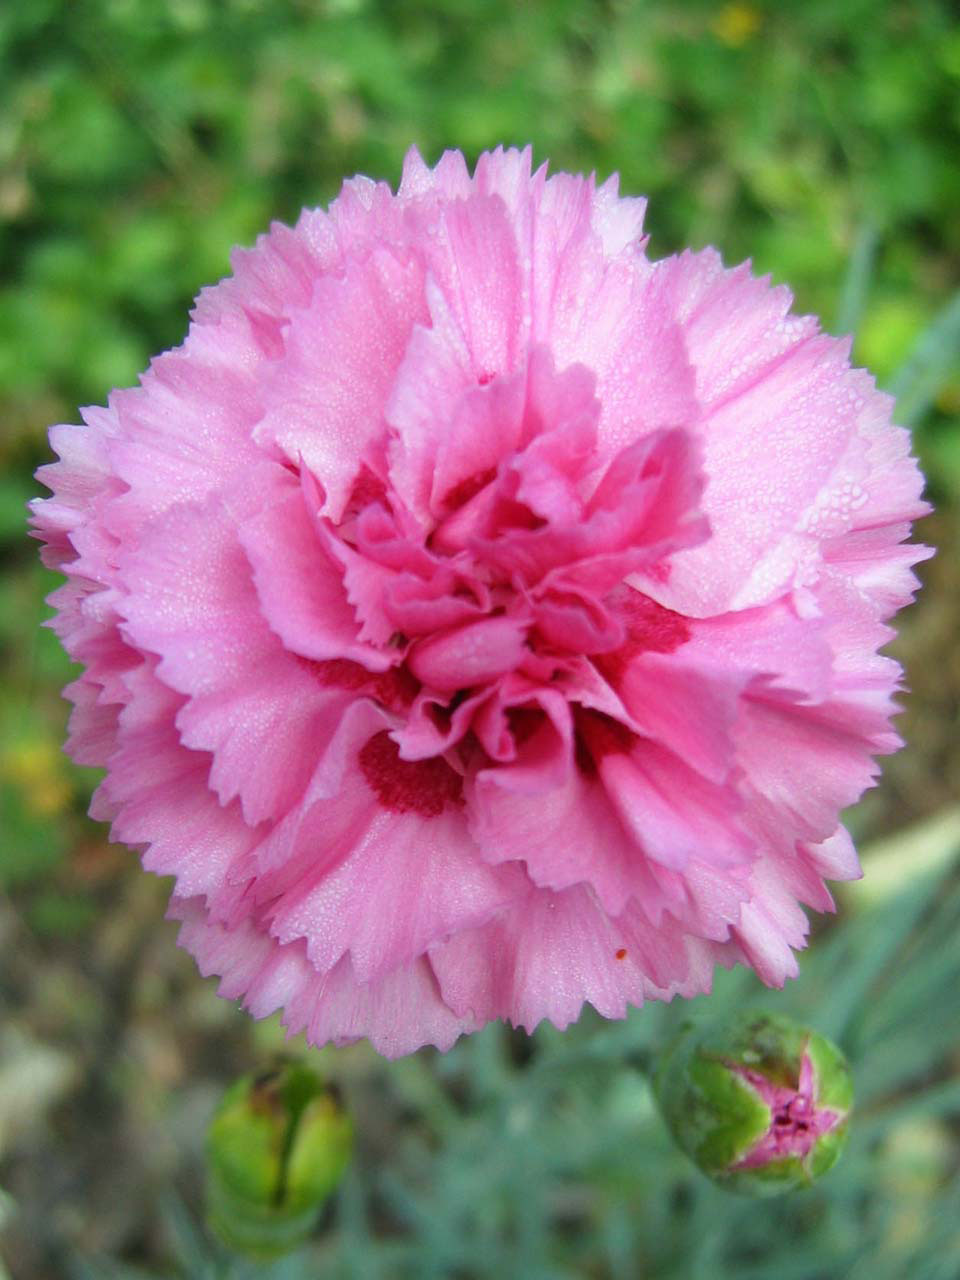 Carnation is the January Flower of the Month